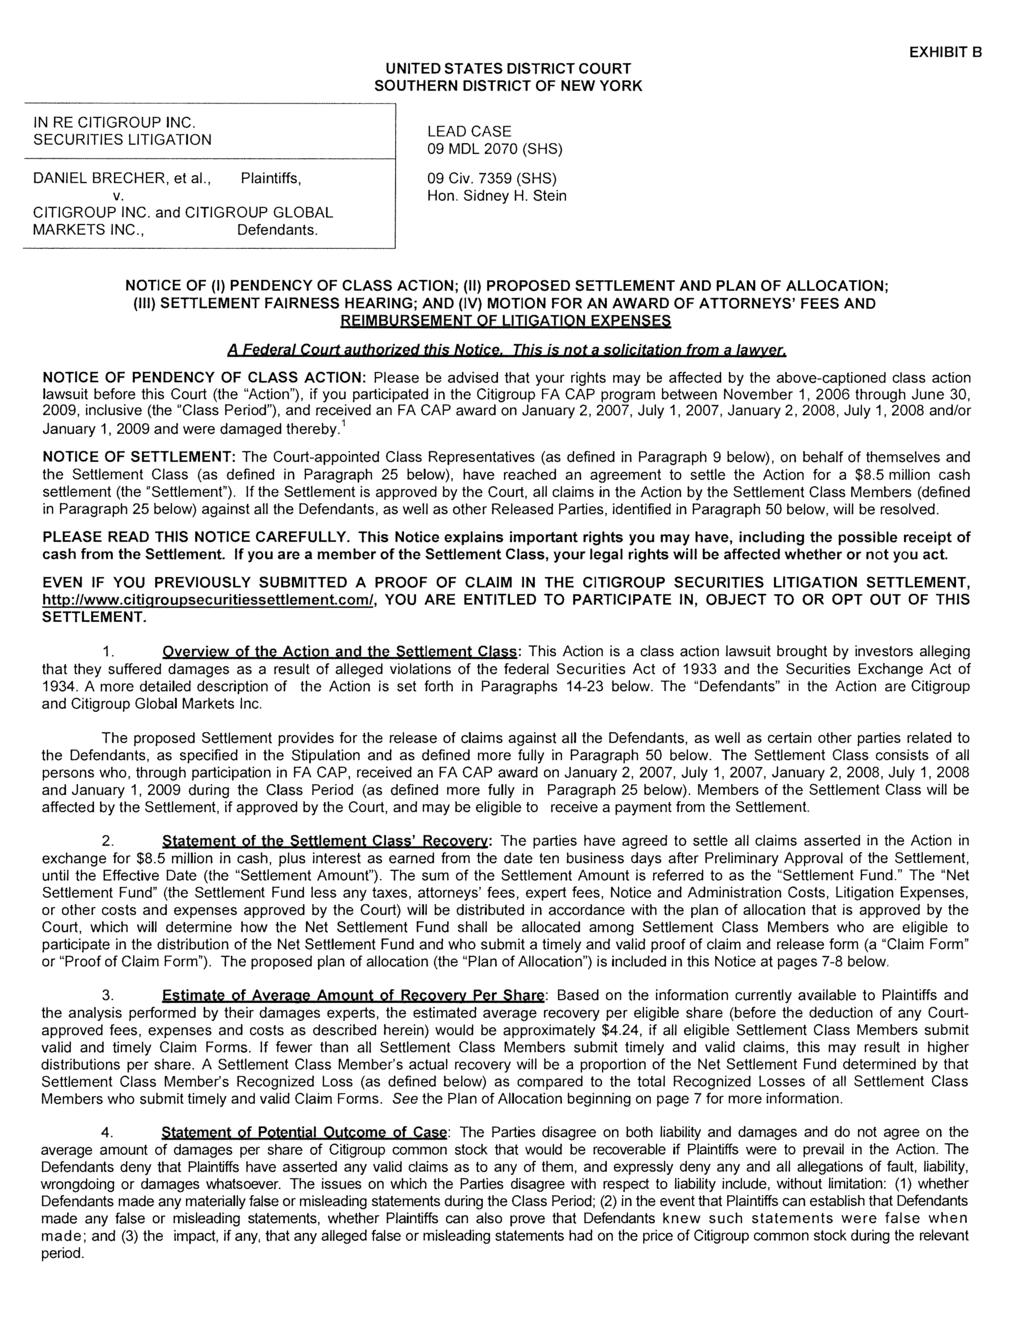 Case 1:09-cv-07359-SHS Document 50-1 Filed 01/22/14 Page 50 of 91 UNITED STATES DISTRICT COURT SOUTHERN DISTRICT OF NEW YORK EXHIBIT B IN RE CITIGROUP INC. SECURITIES LITIGATION DANIEL BRECHER, et al.